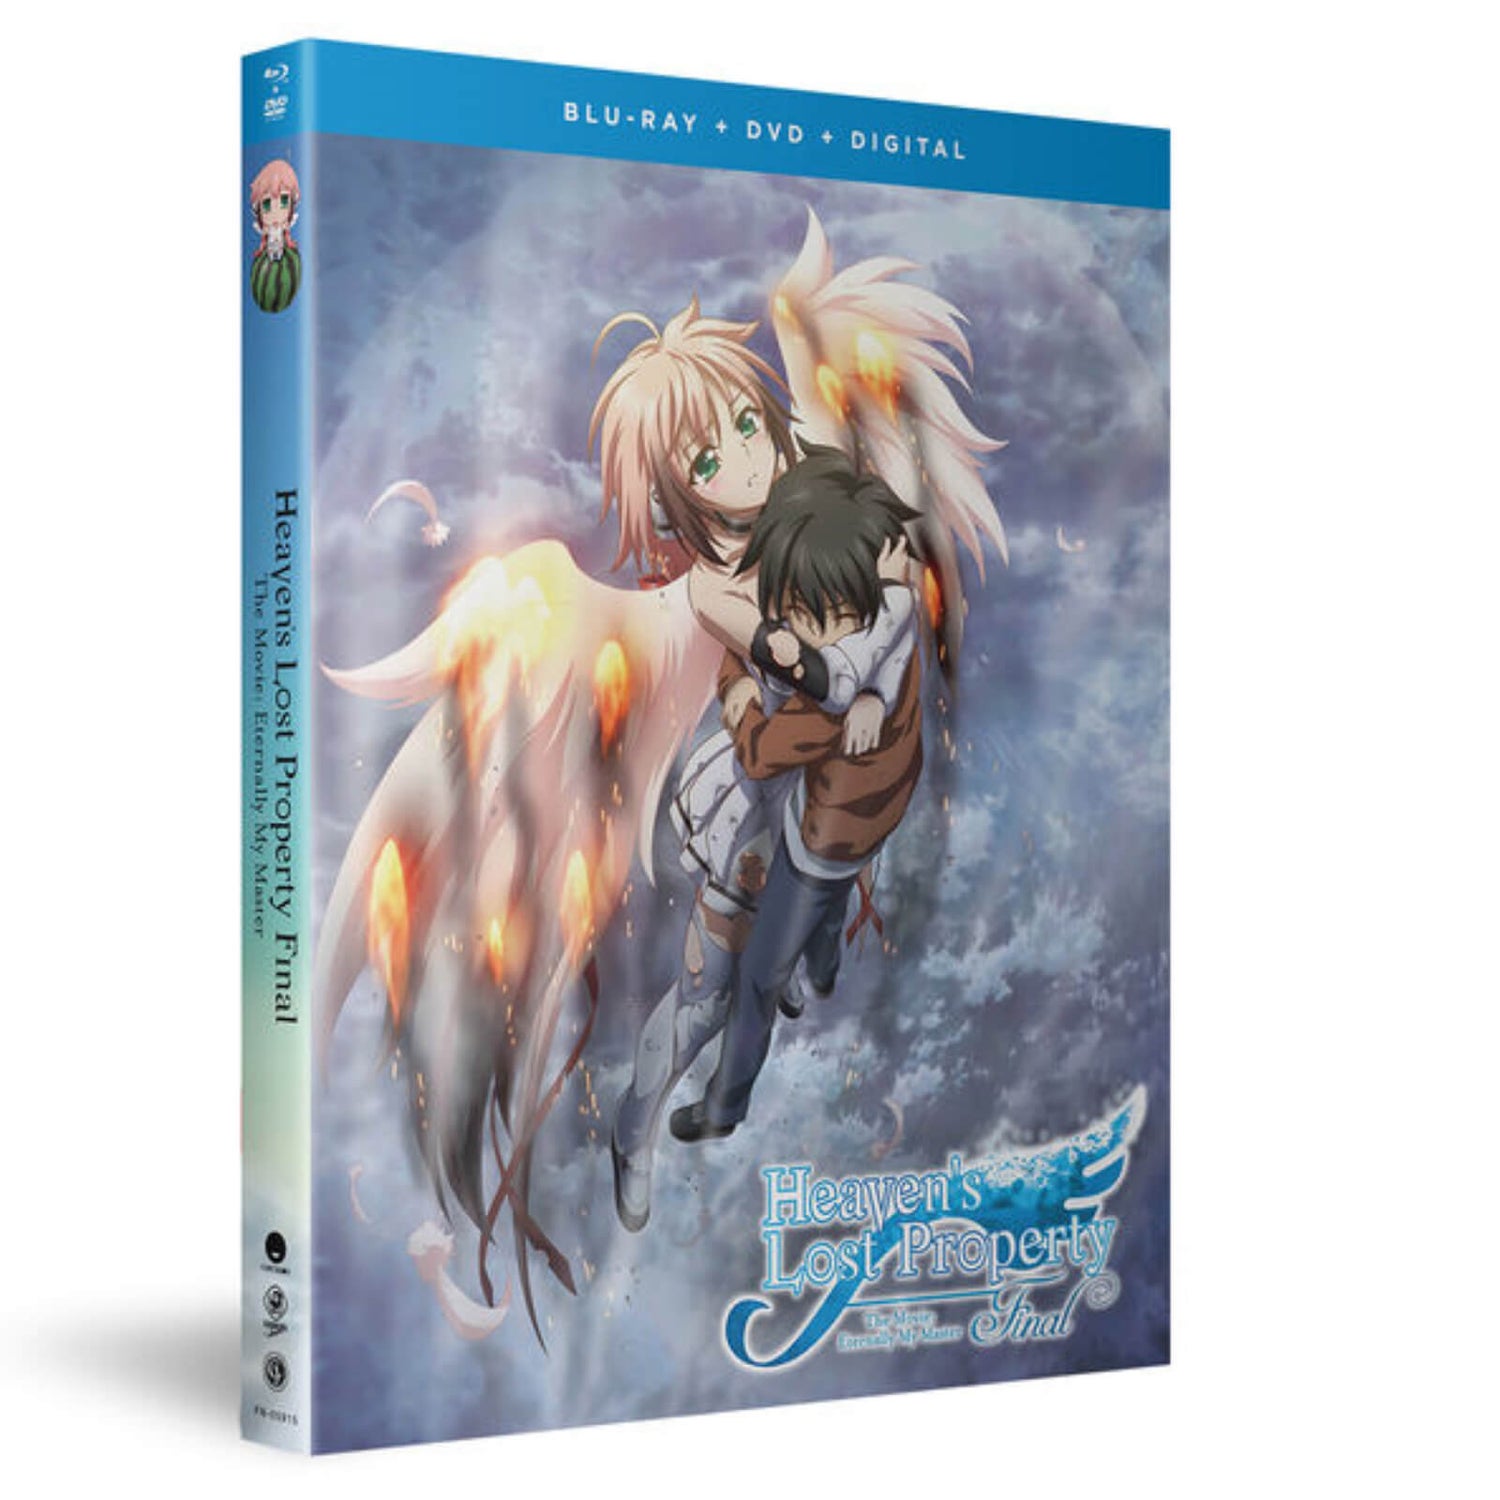 Heaven's Lost Property Final: The Movie: Eternally My Master (Includes DVD) (US Import)